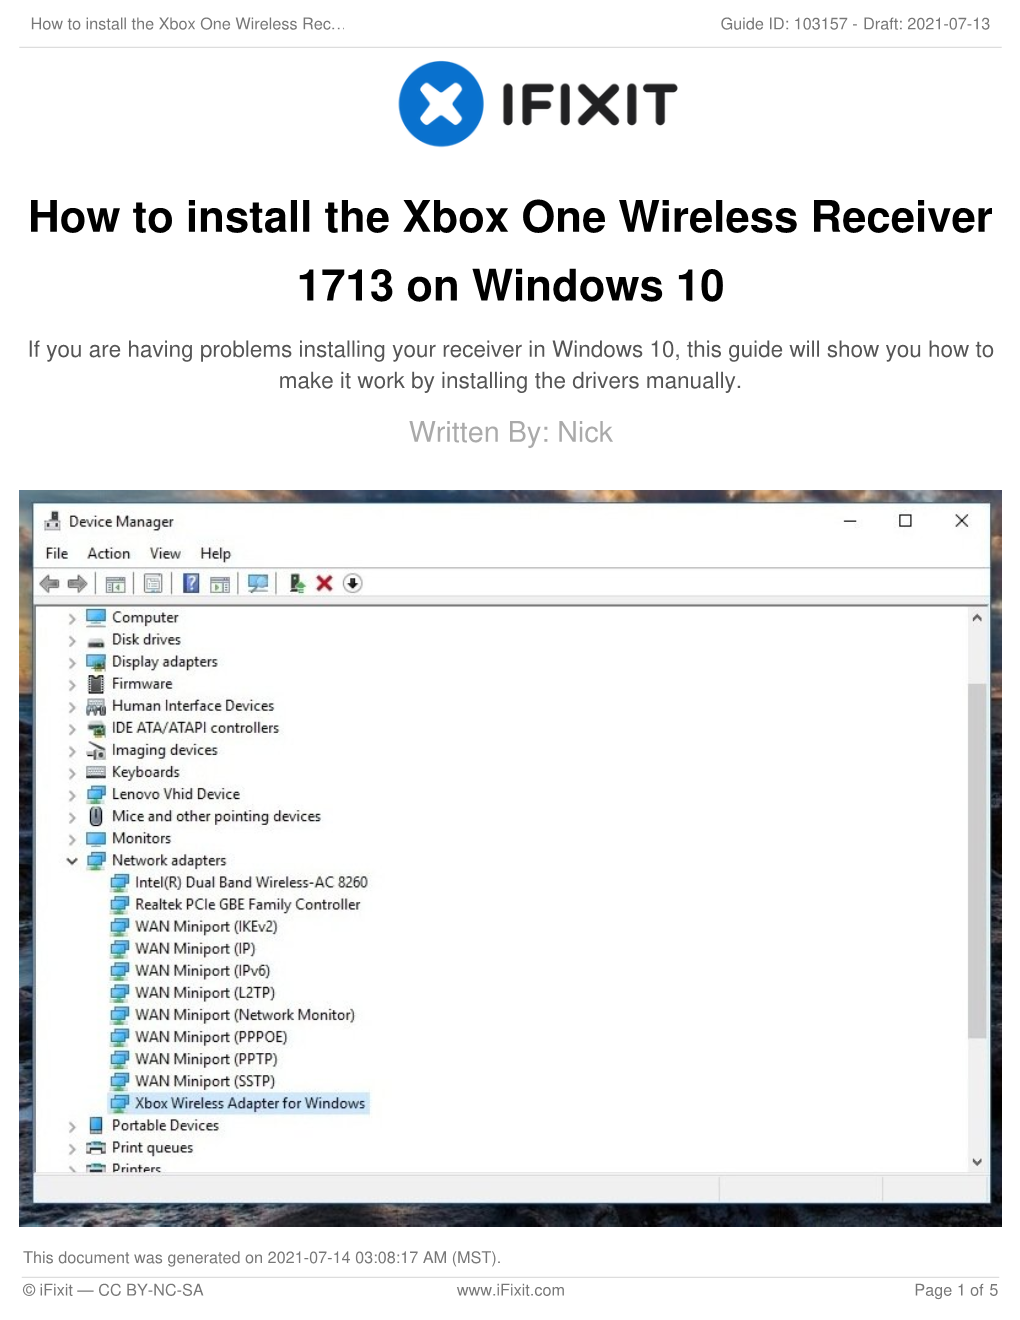 How to Install the Xbox One Wireless Receiver 1713 on Windows 10